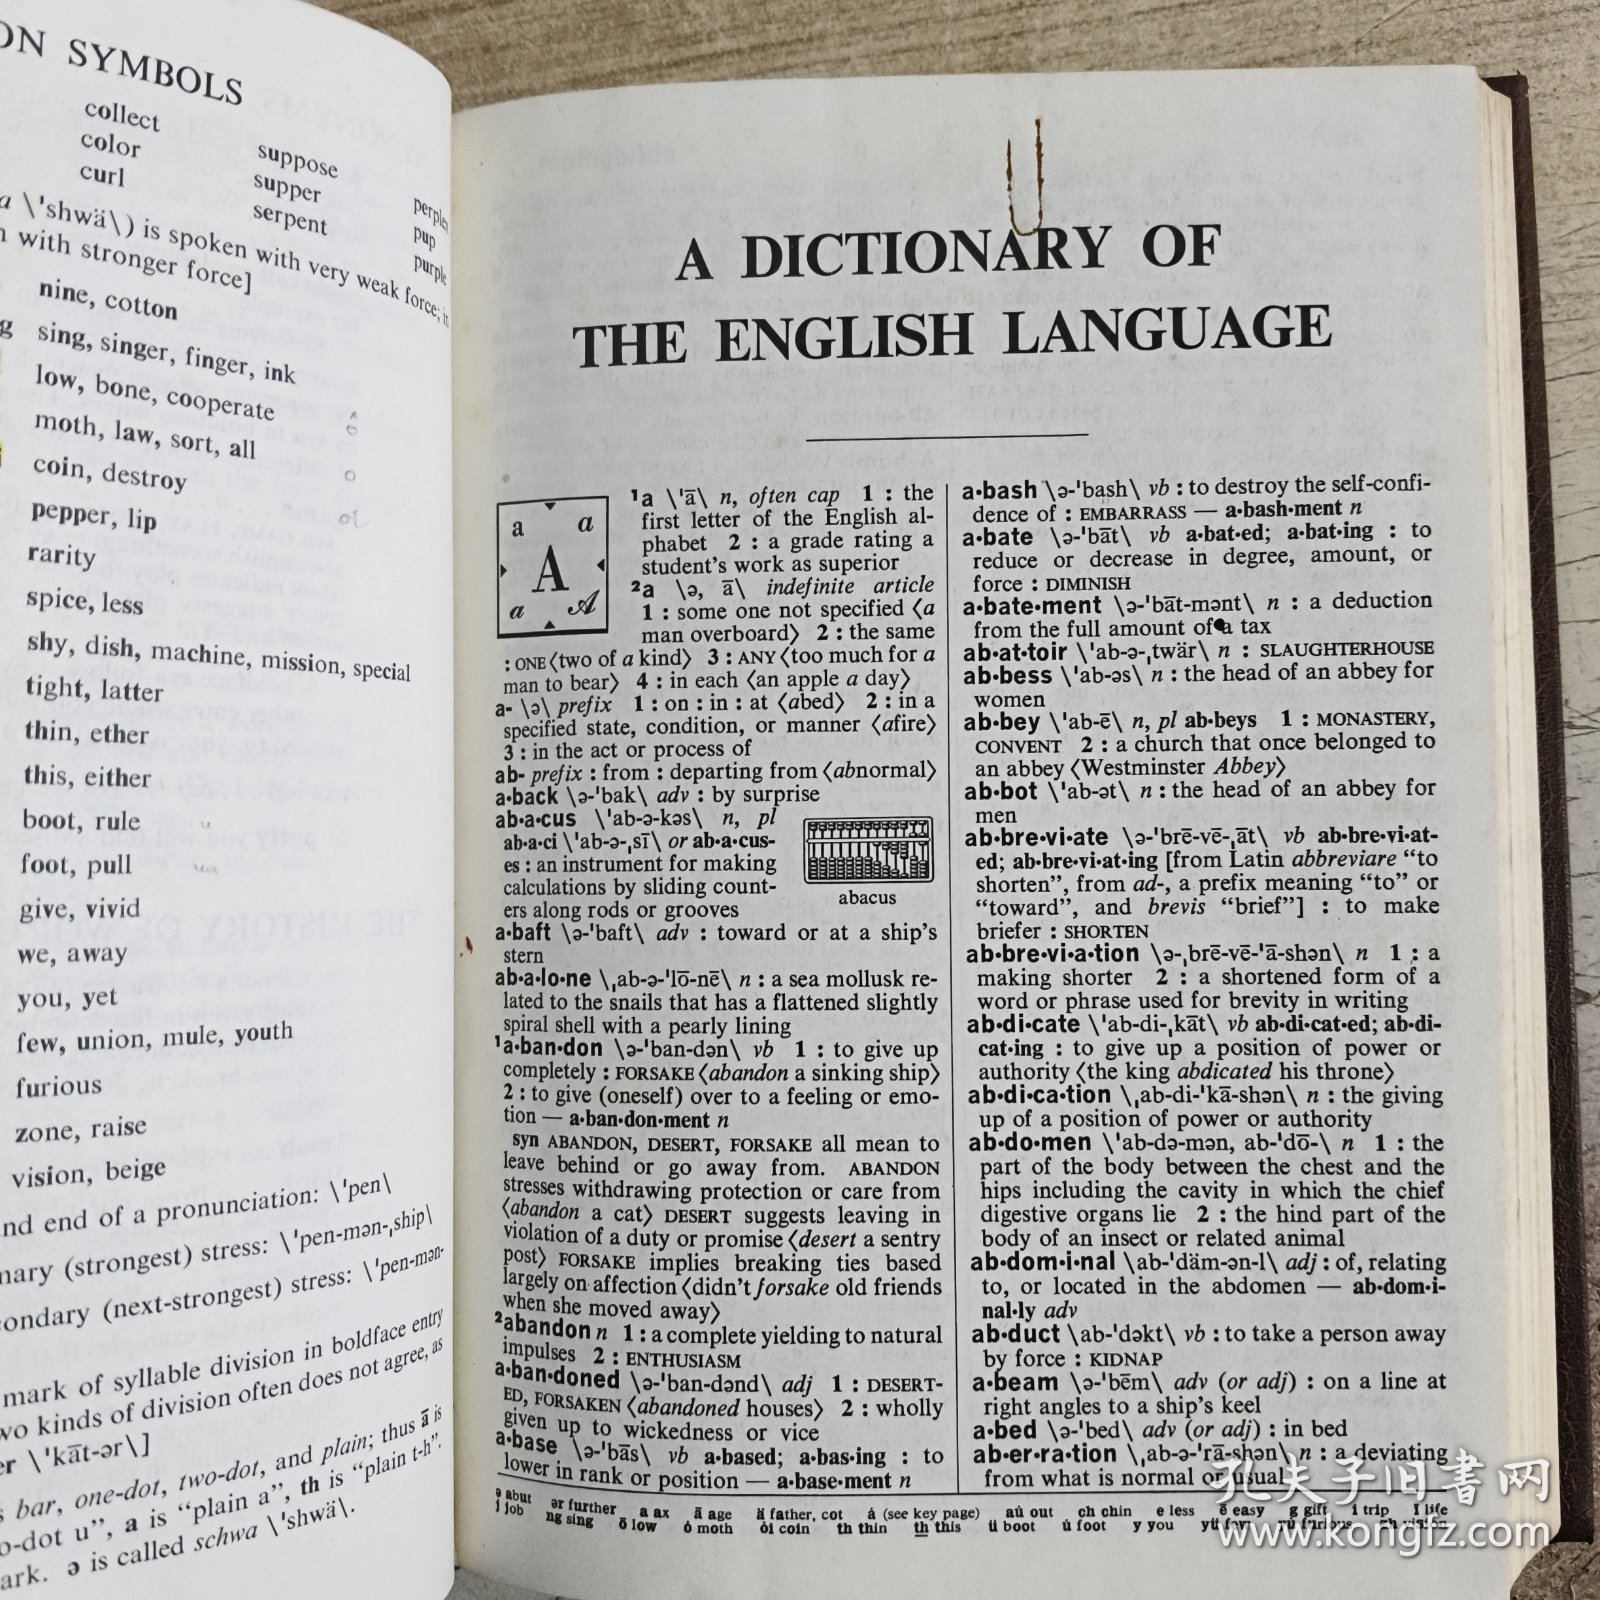 A Dictionary of The English Language